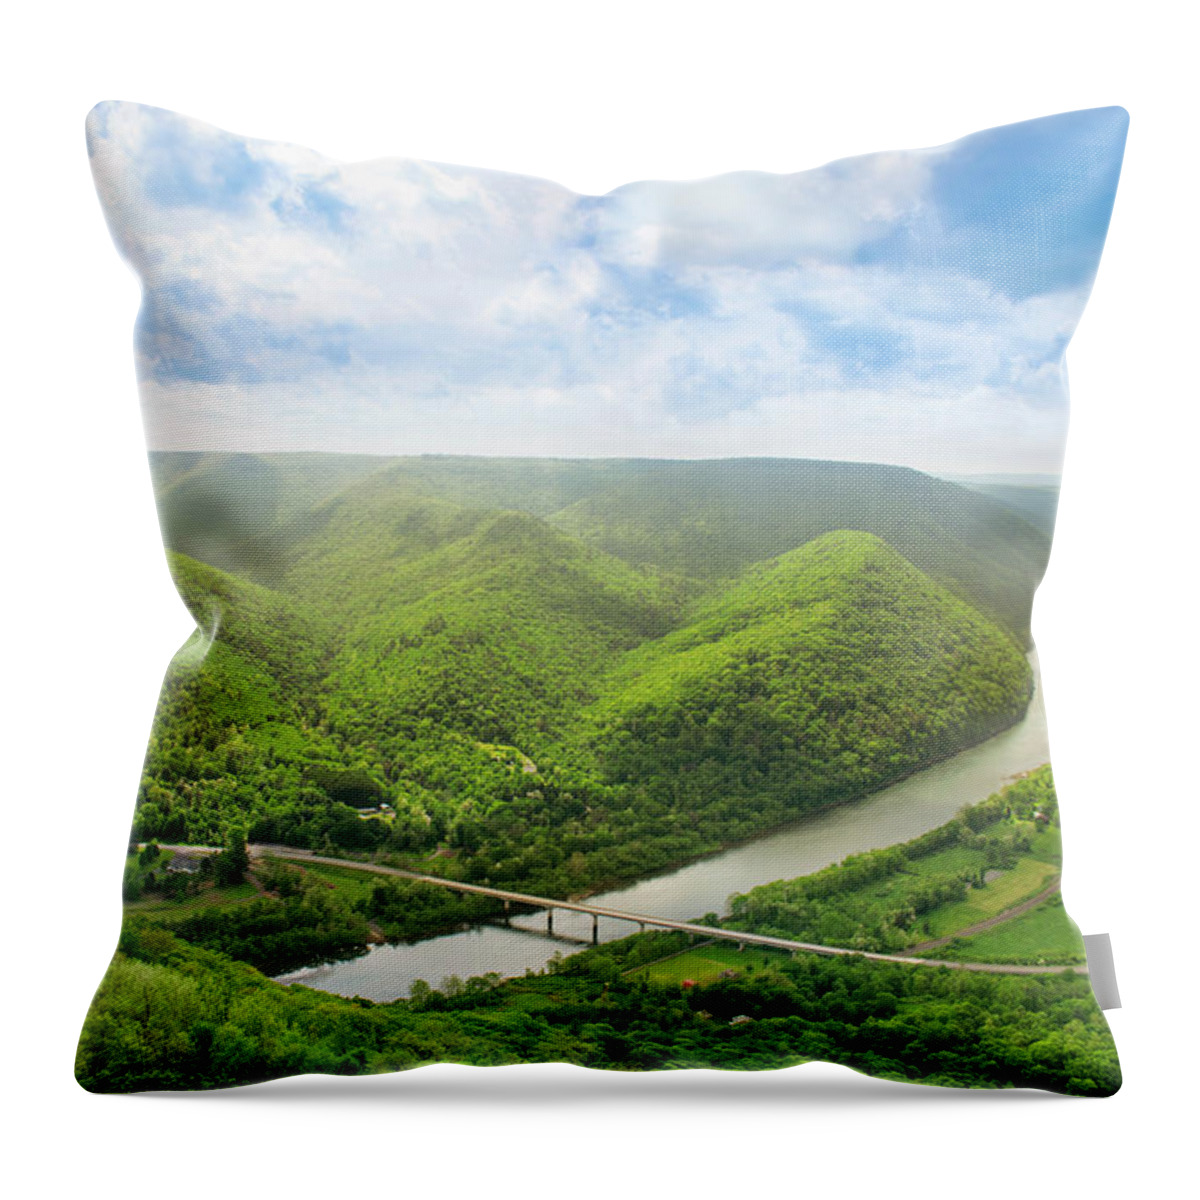 Hyner View State Park Throw Pillow featuring the photograph Hyner View State Park by Christina Rollo